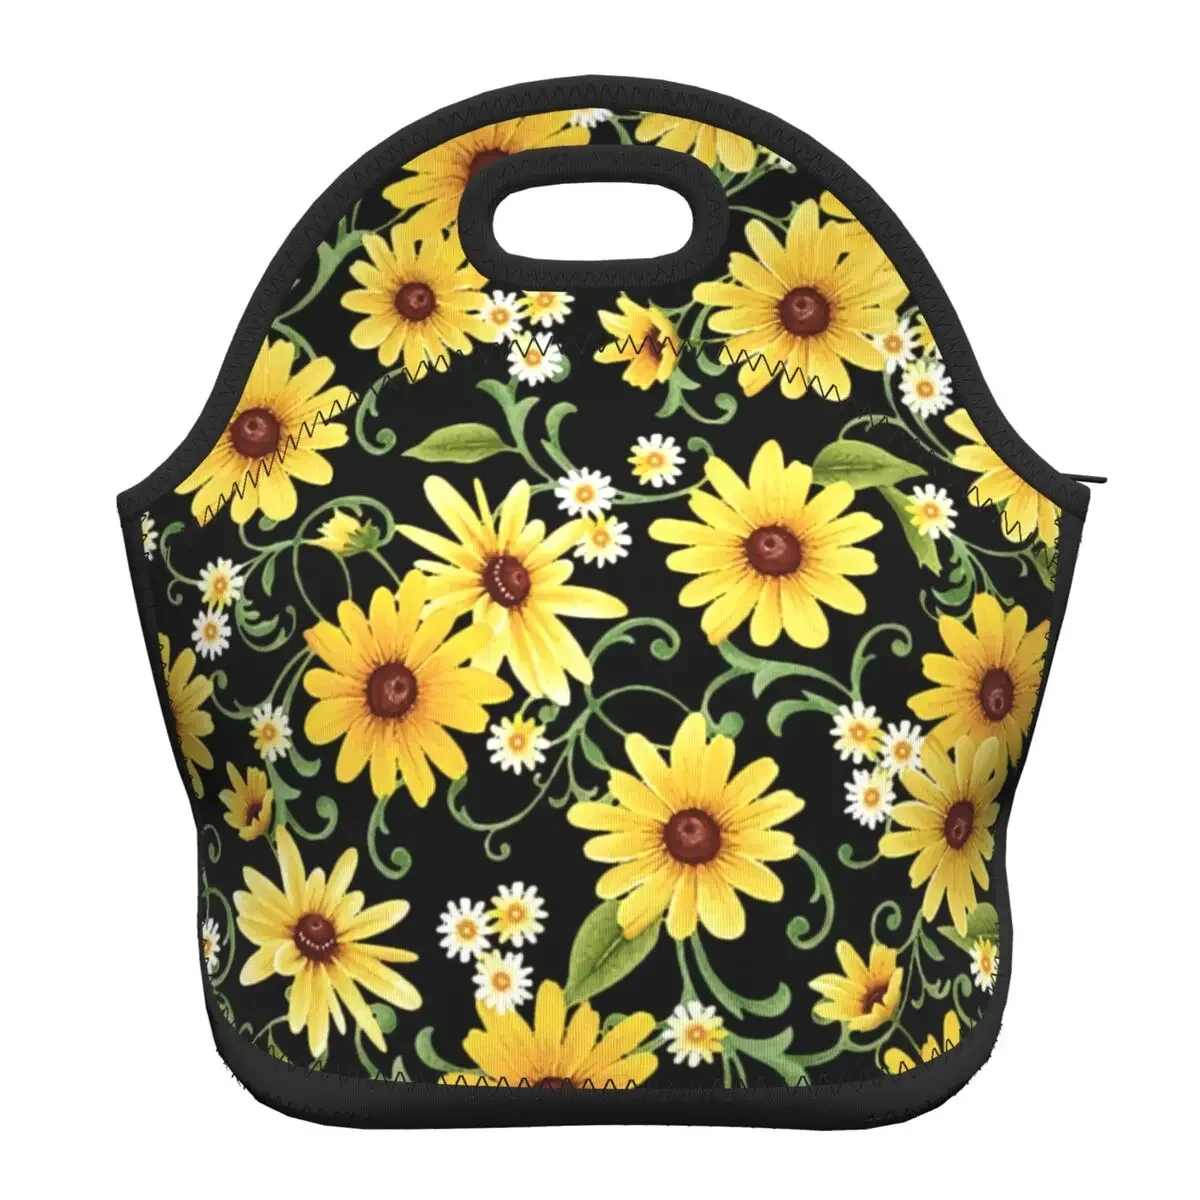 

Neoprene Sunflower And Daisy Thermal Insulated Lunch Bags Women Floral Flowers Portable Lunch Container for Work Travel Food Box